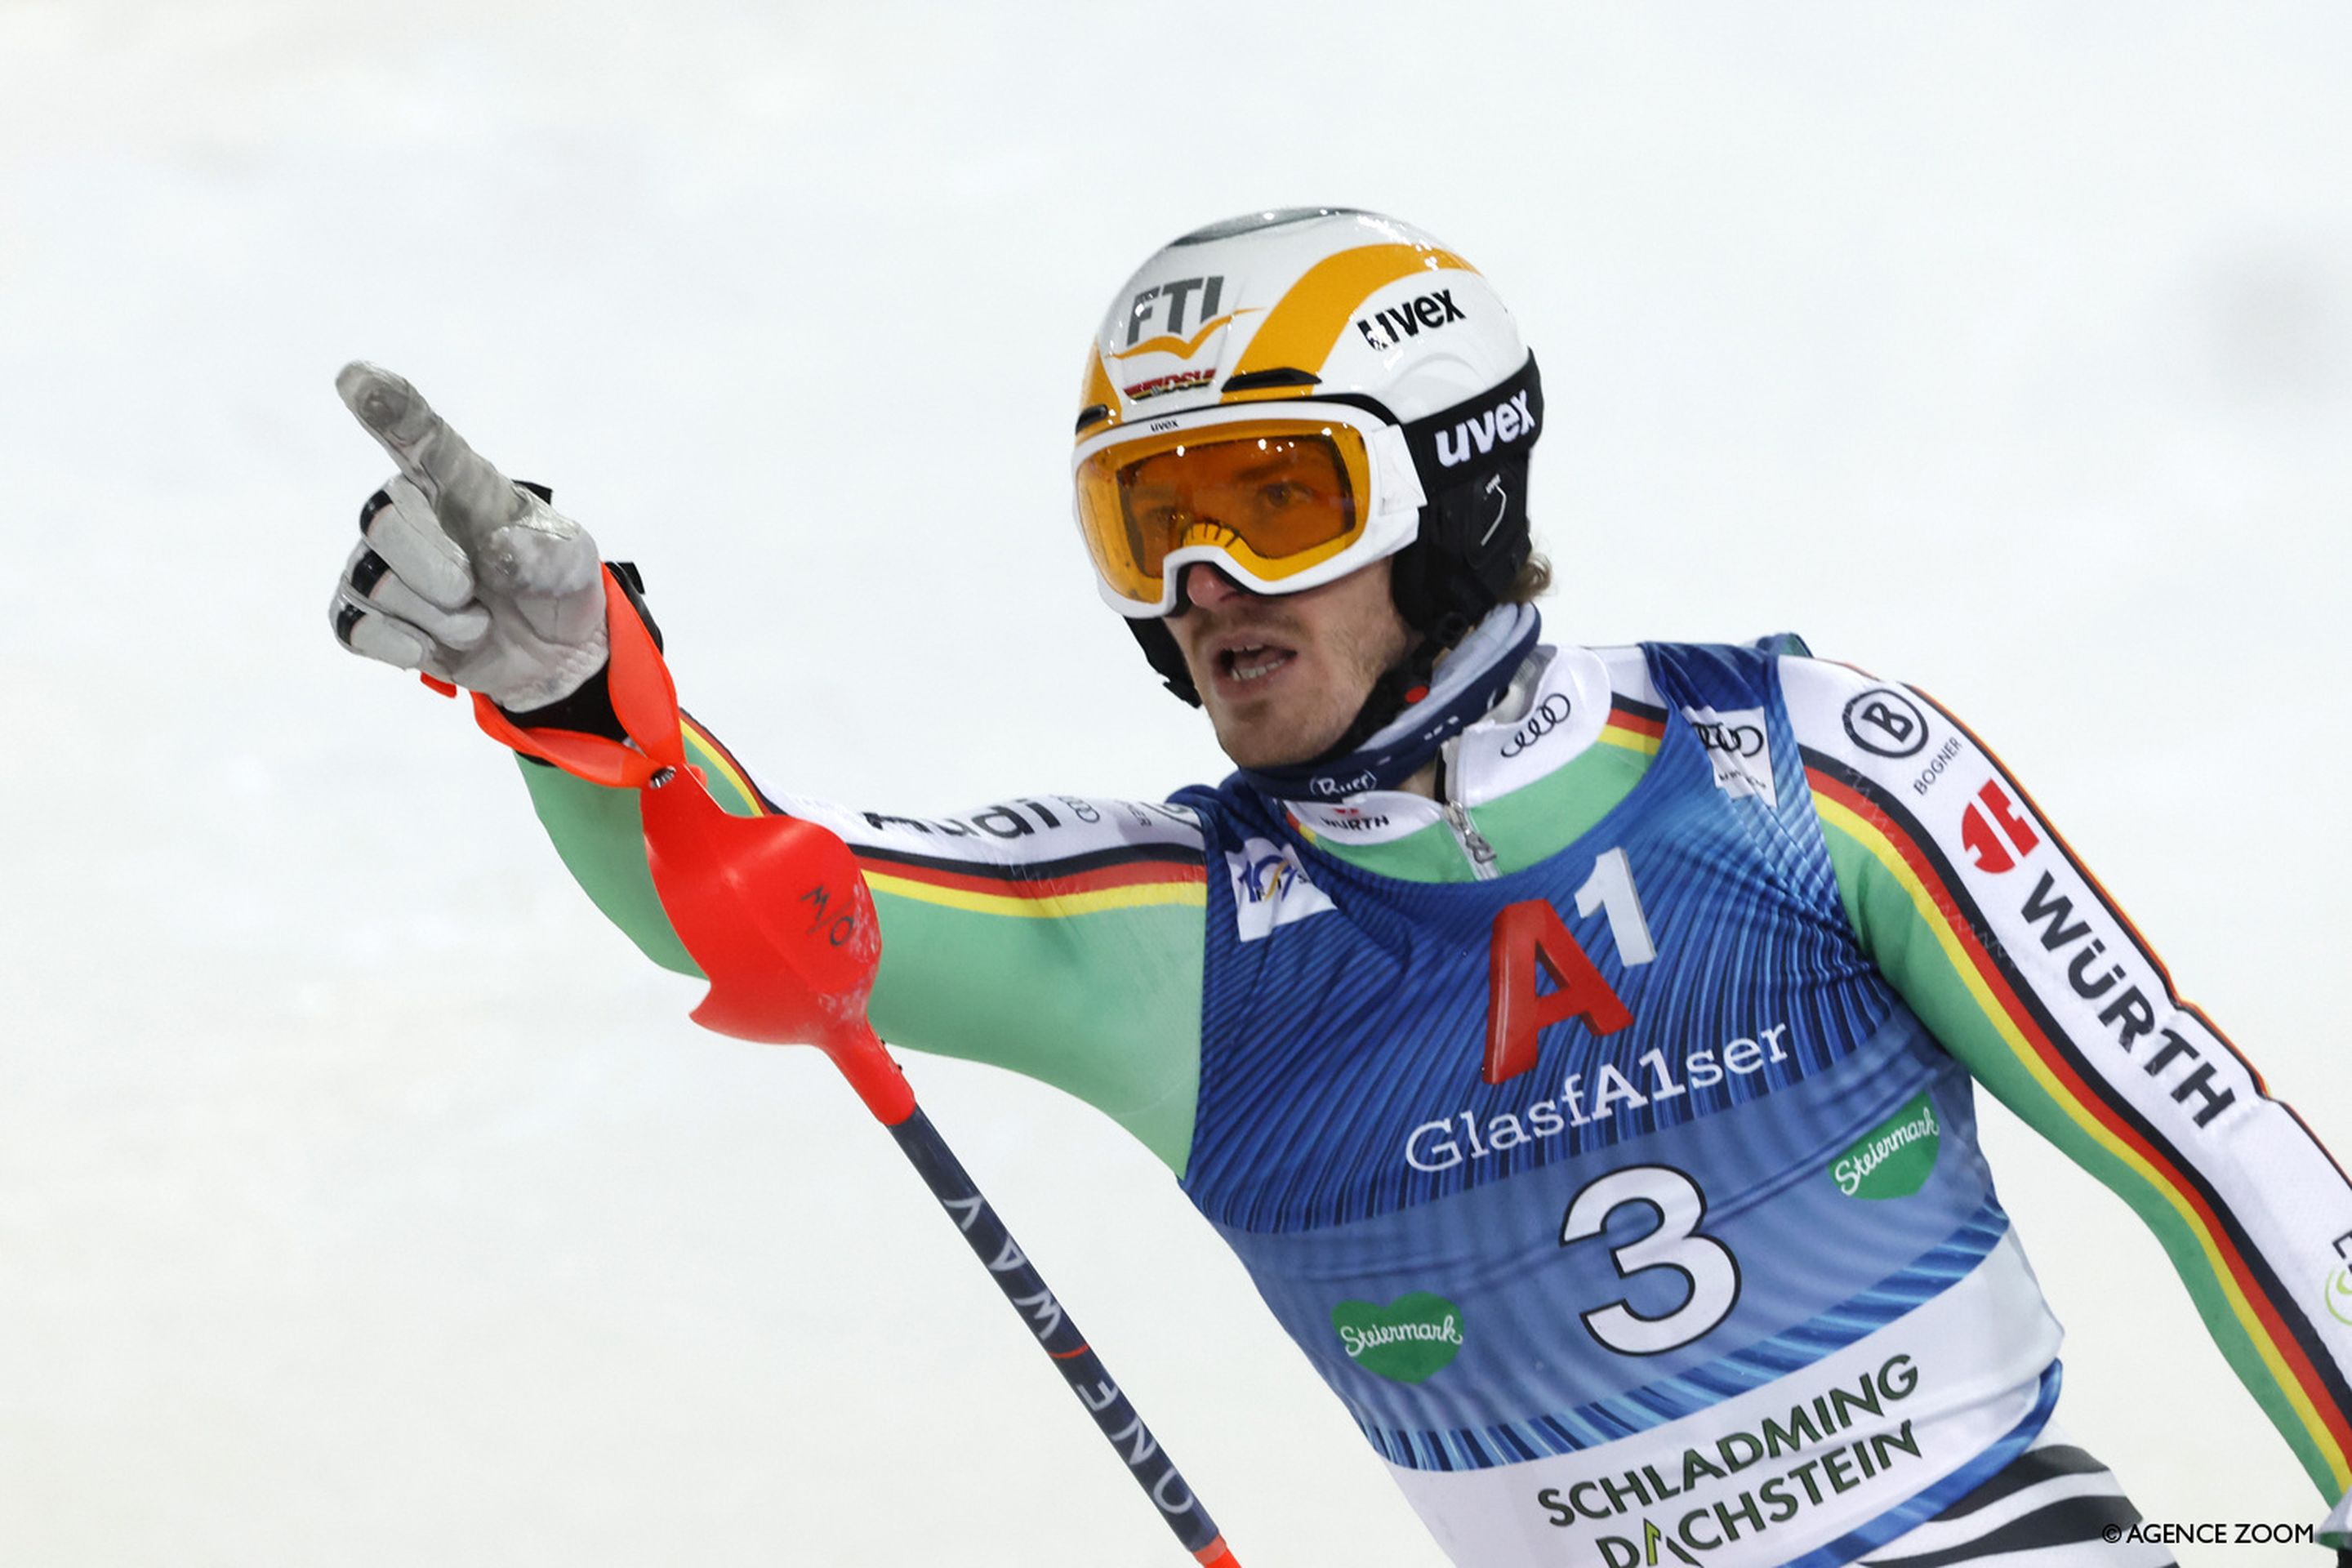 No. 1: Linus Strasser (GER) crosses the line to win his second slalom race in a row (Agence Zoom)